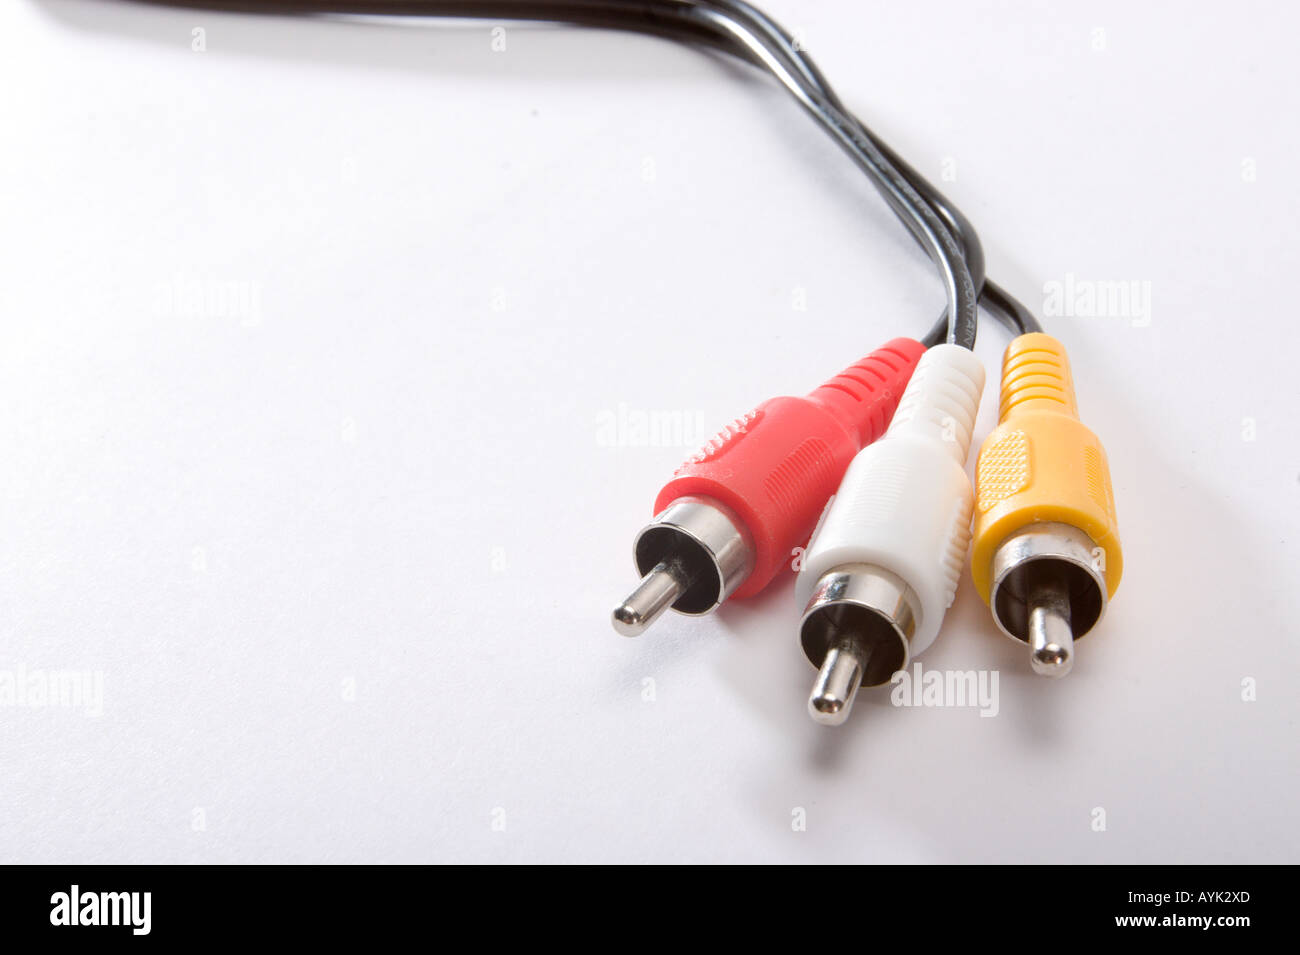 male plugs with cable on white background Stock Photo